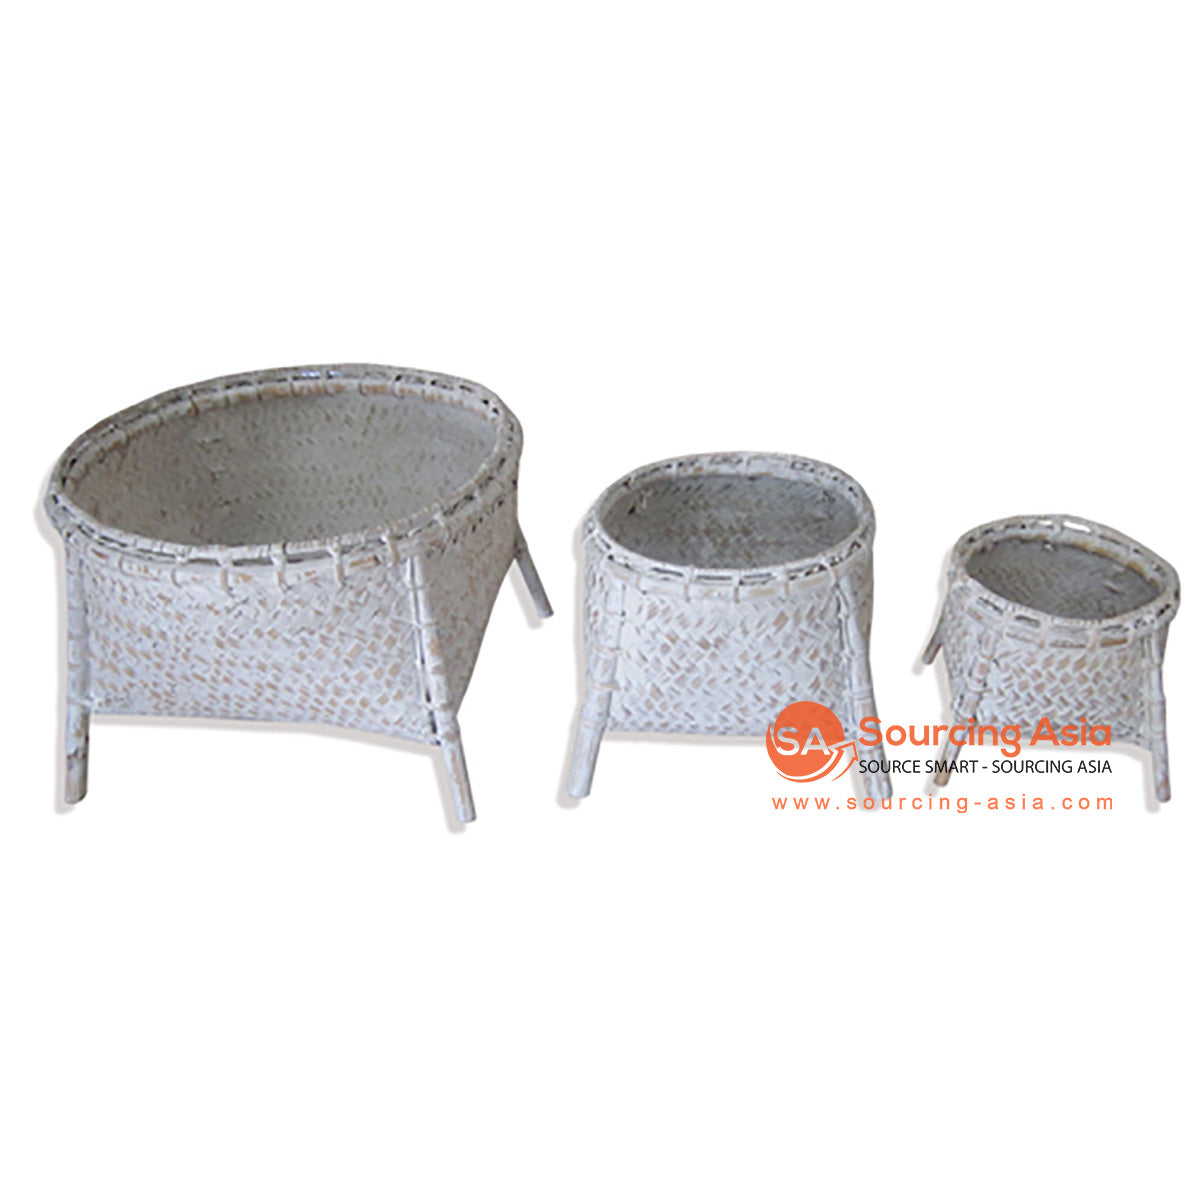 SOP018 SET OF THREE WHITE WASH BAMBOO BASKETS WITH LEGS